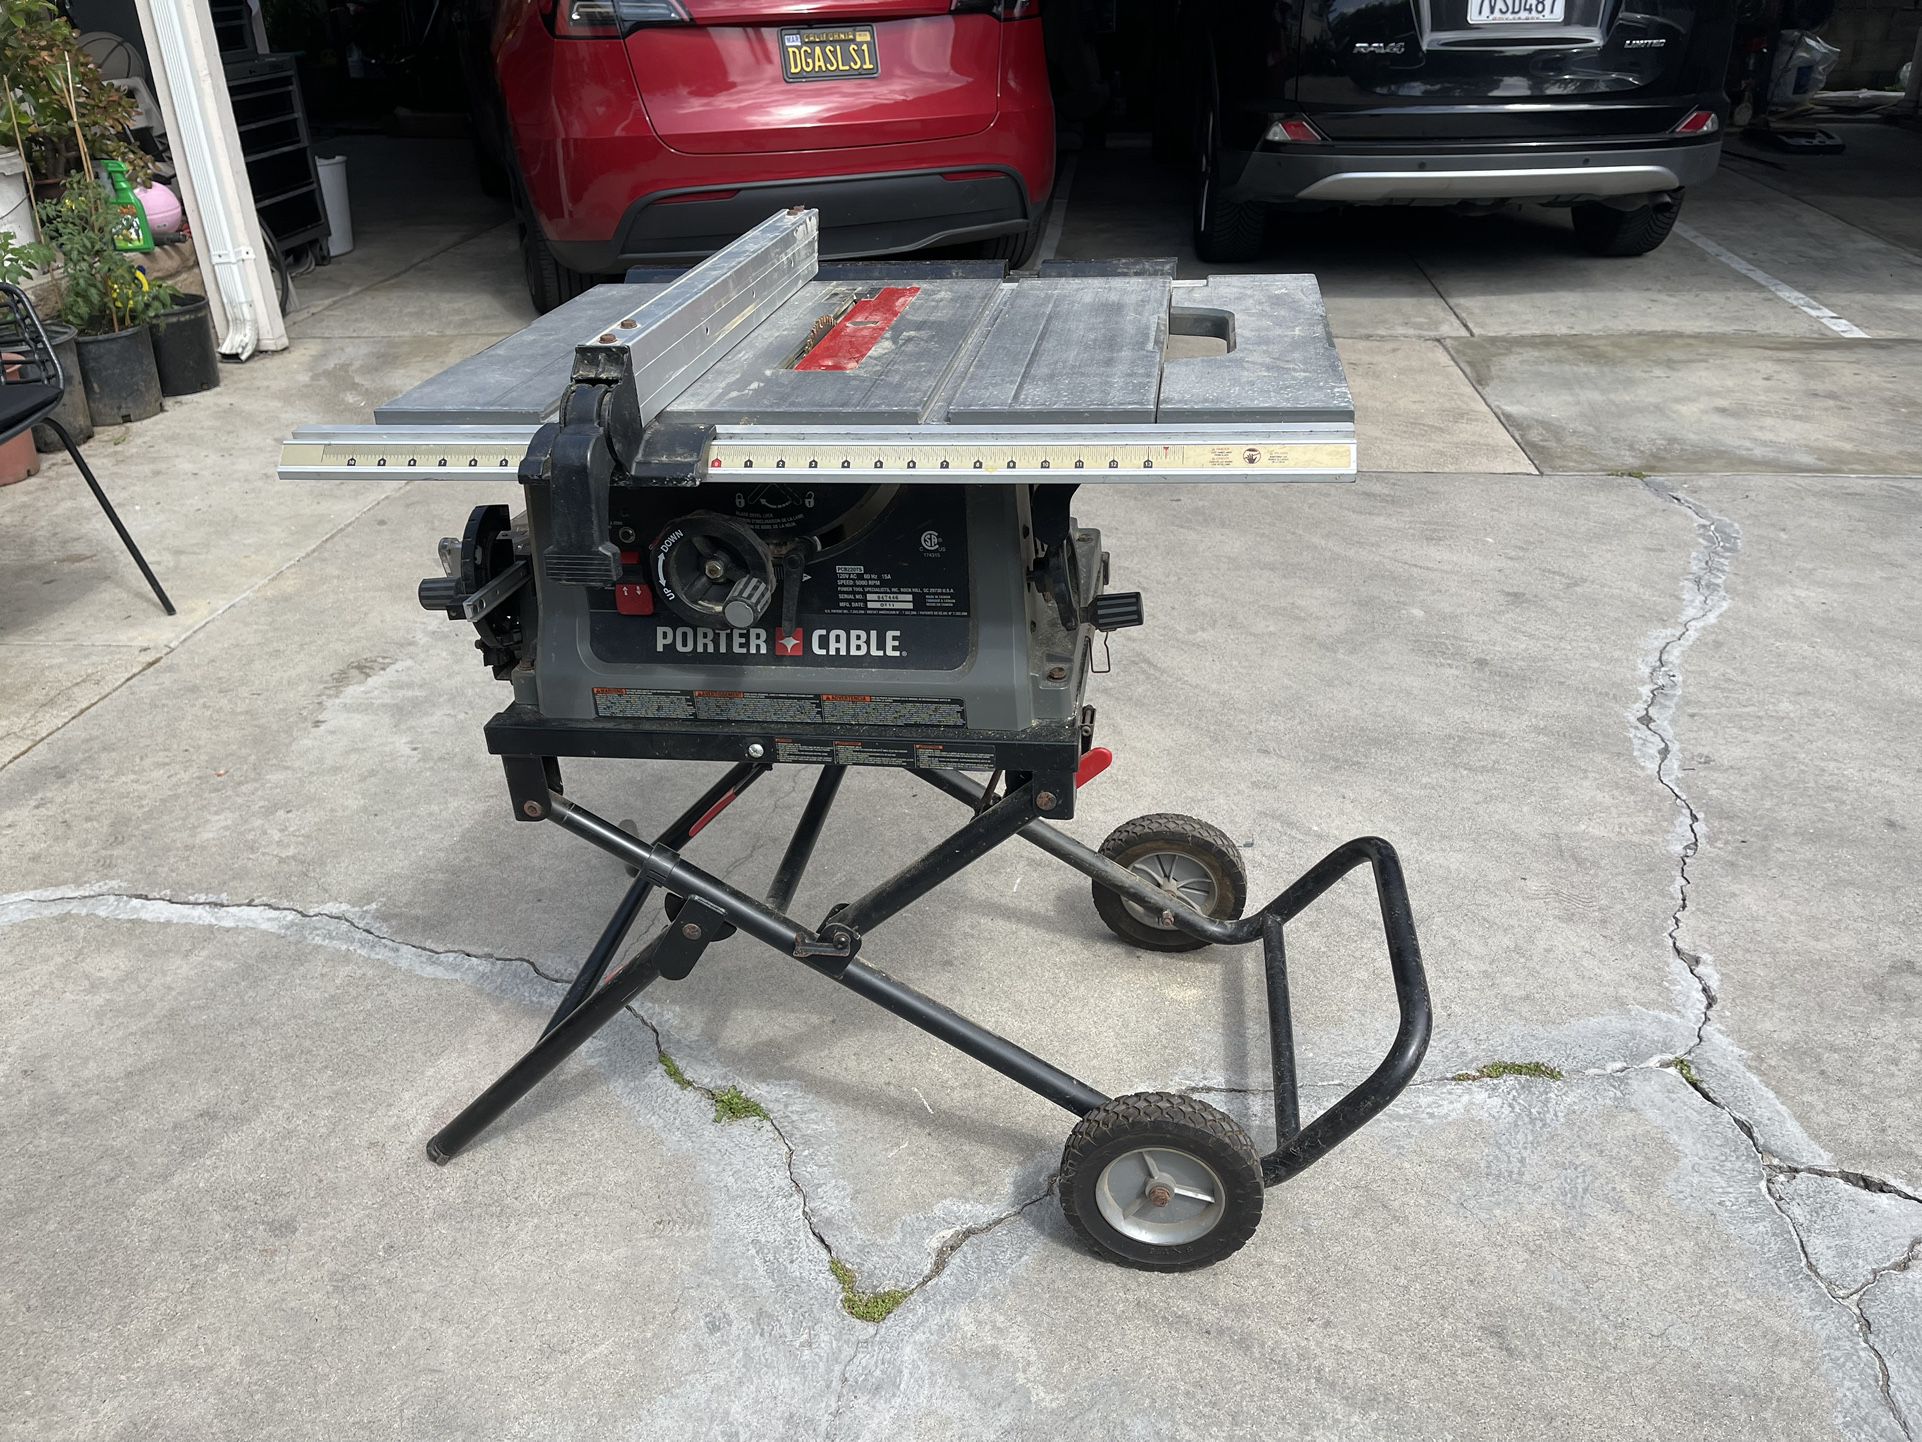 Poetry Cable Table Saw 10” PCB2200TS 